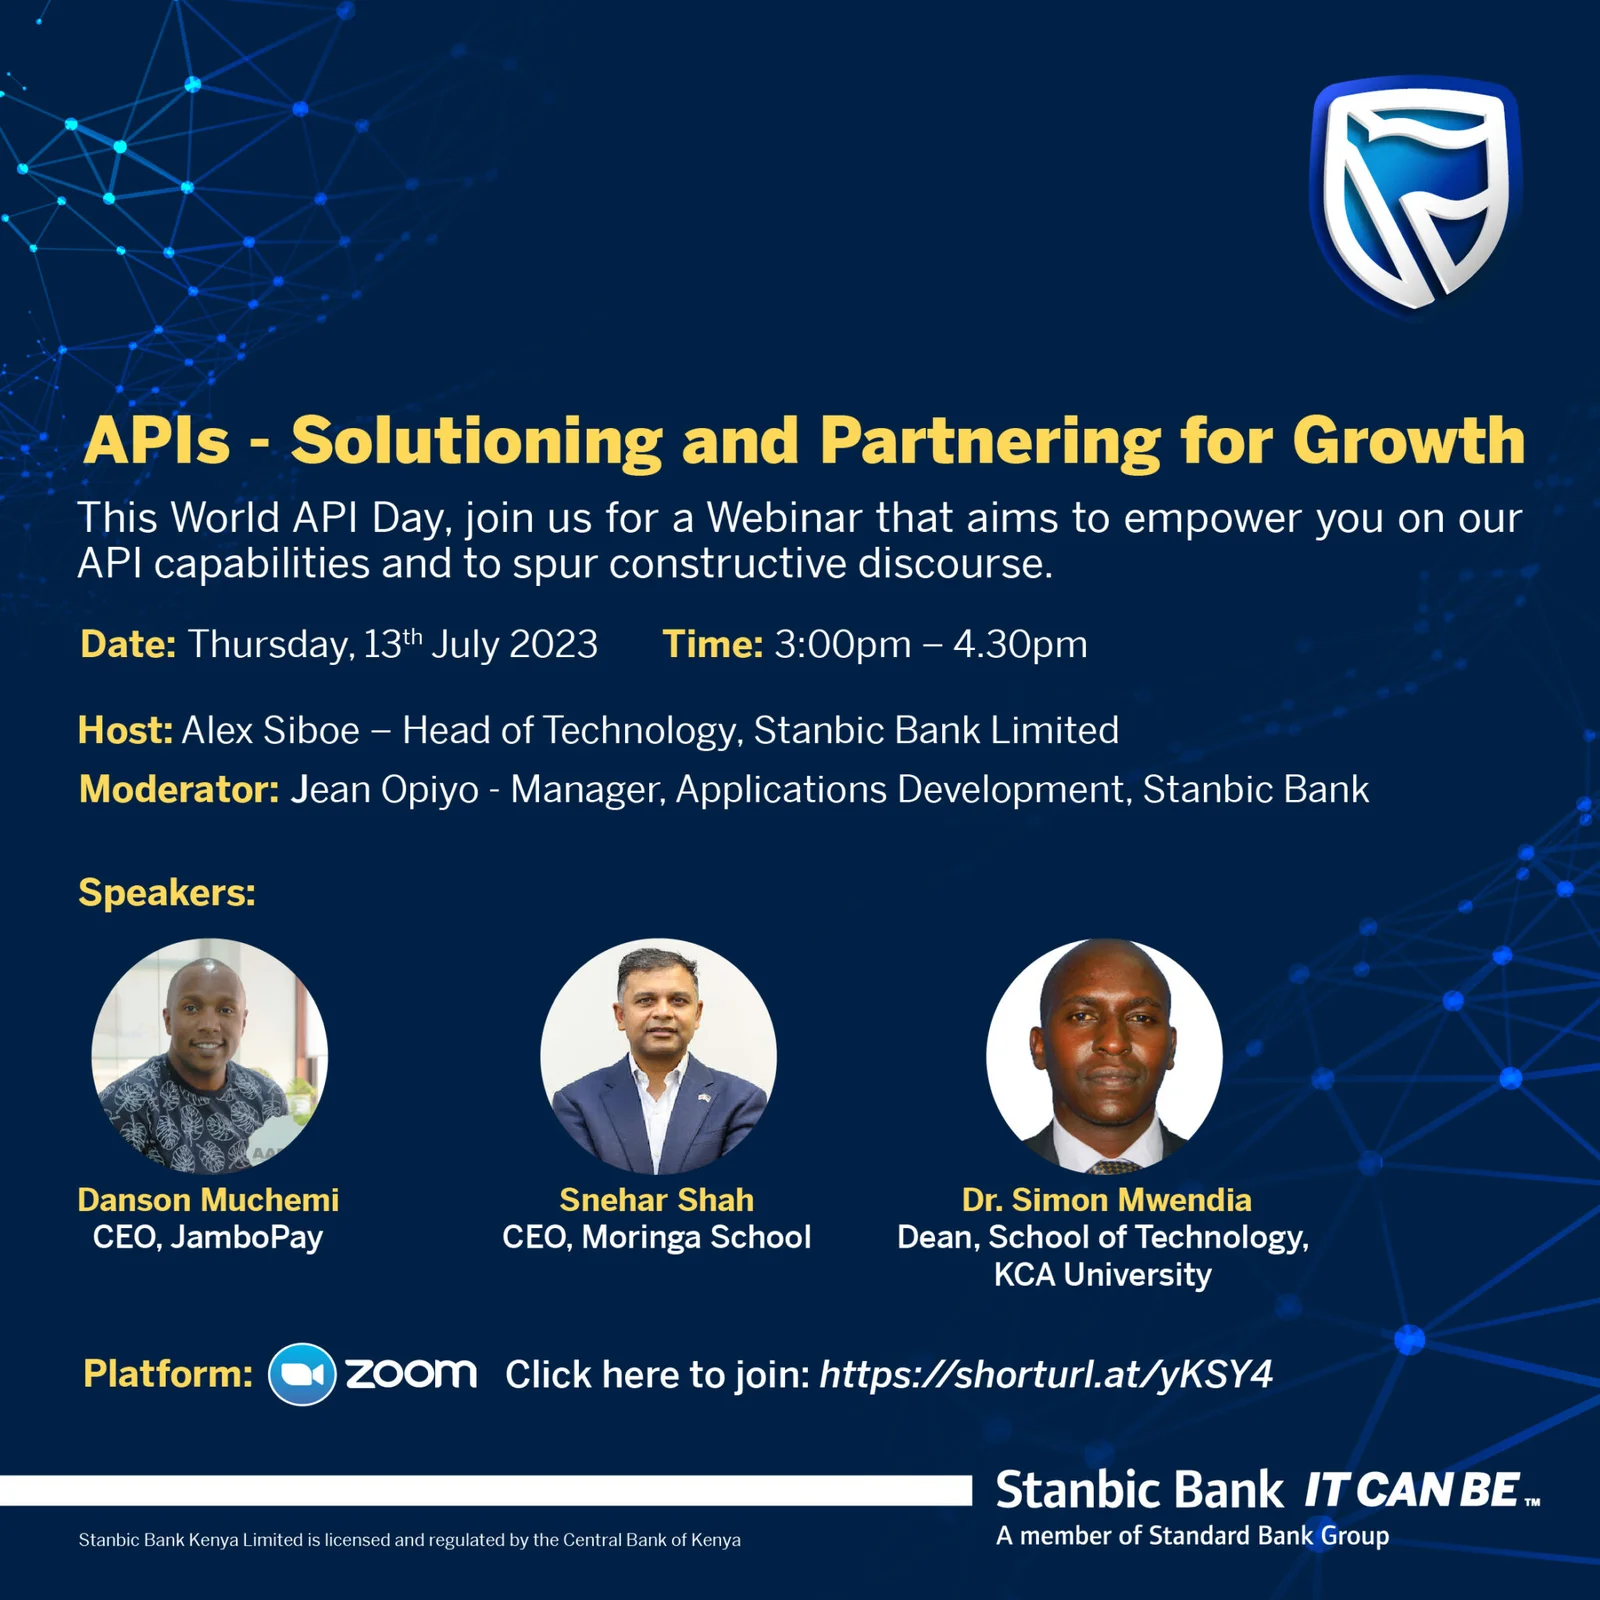 APIs - Solutioning and Partnering for Growth